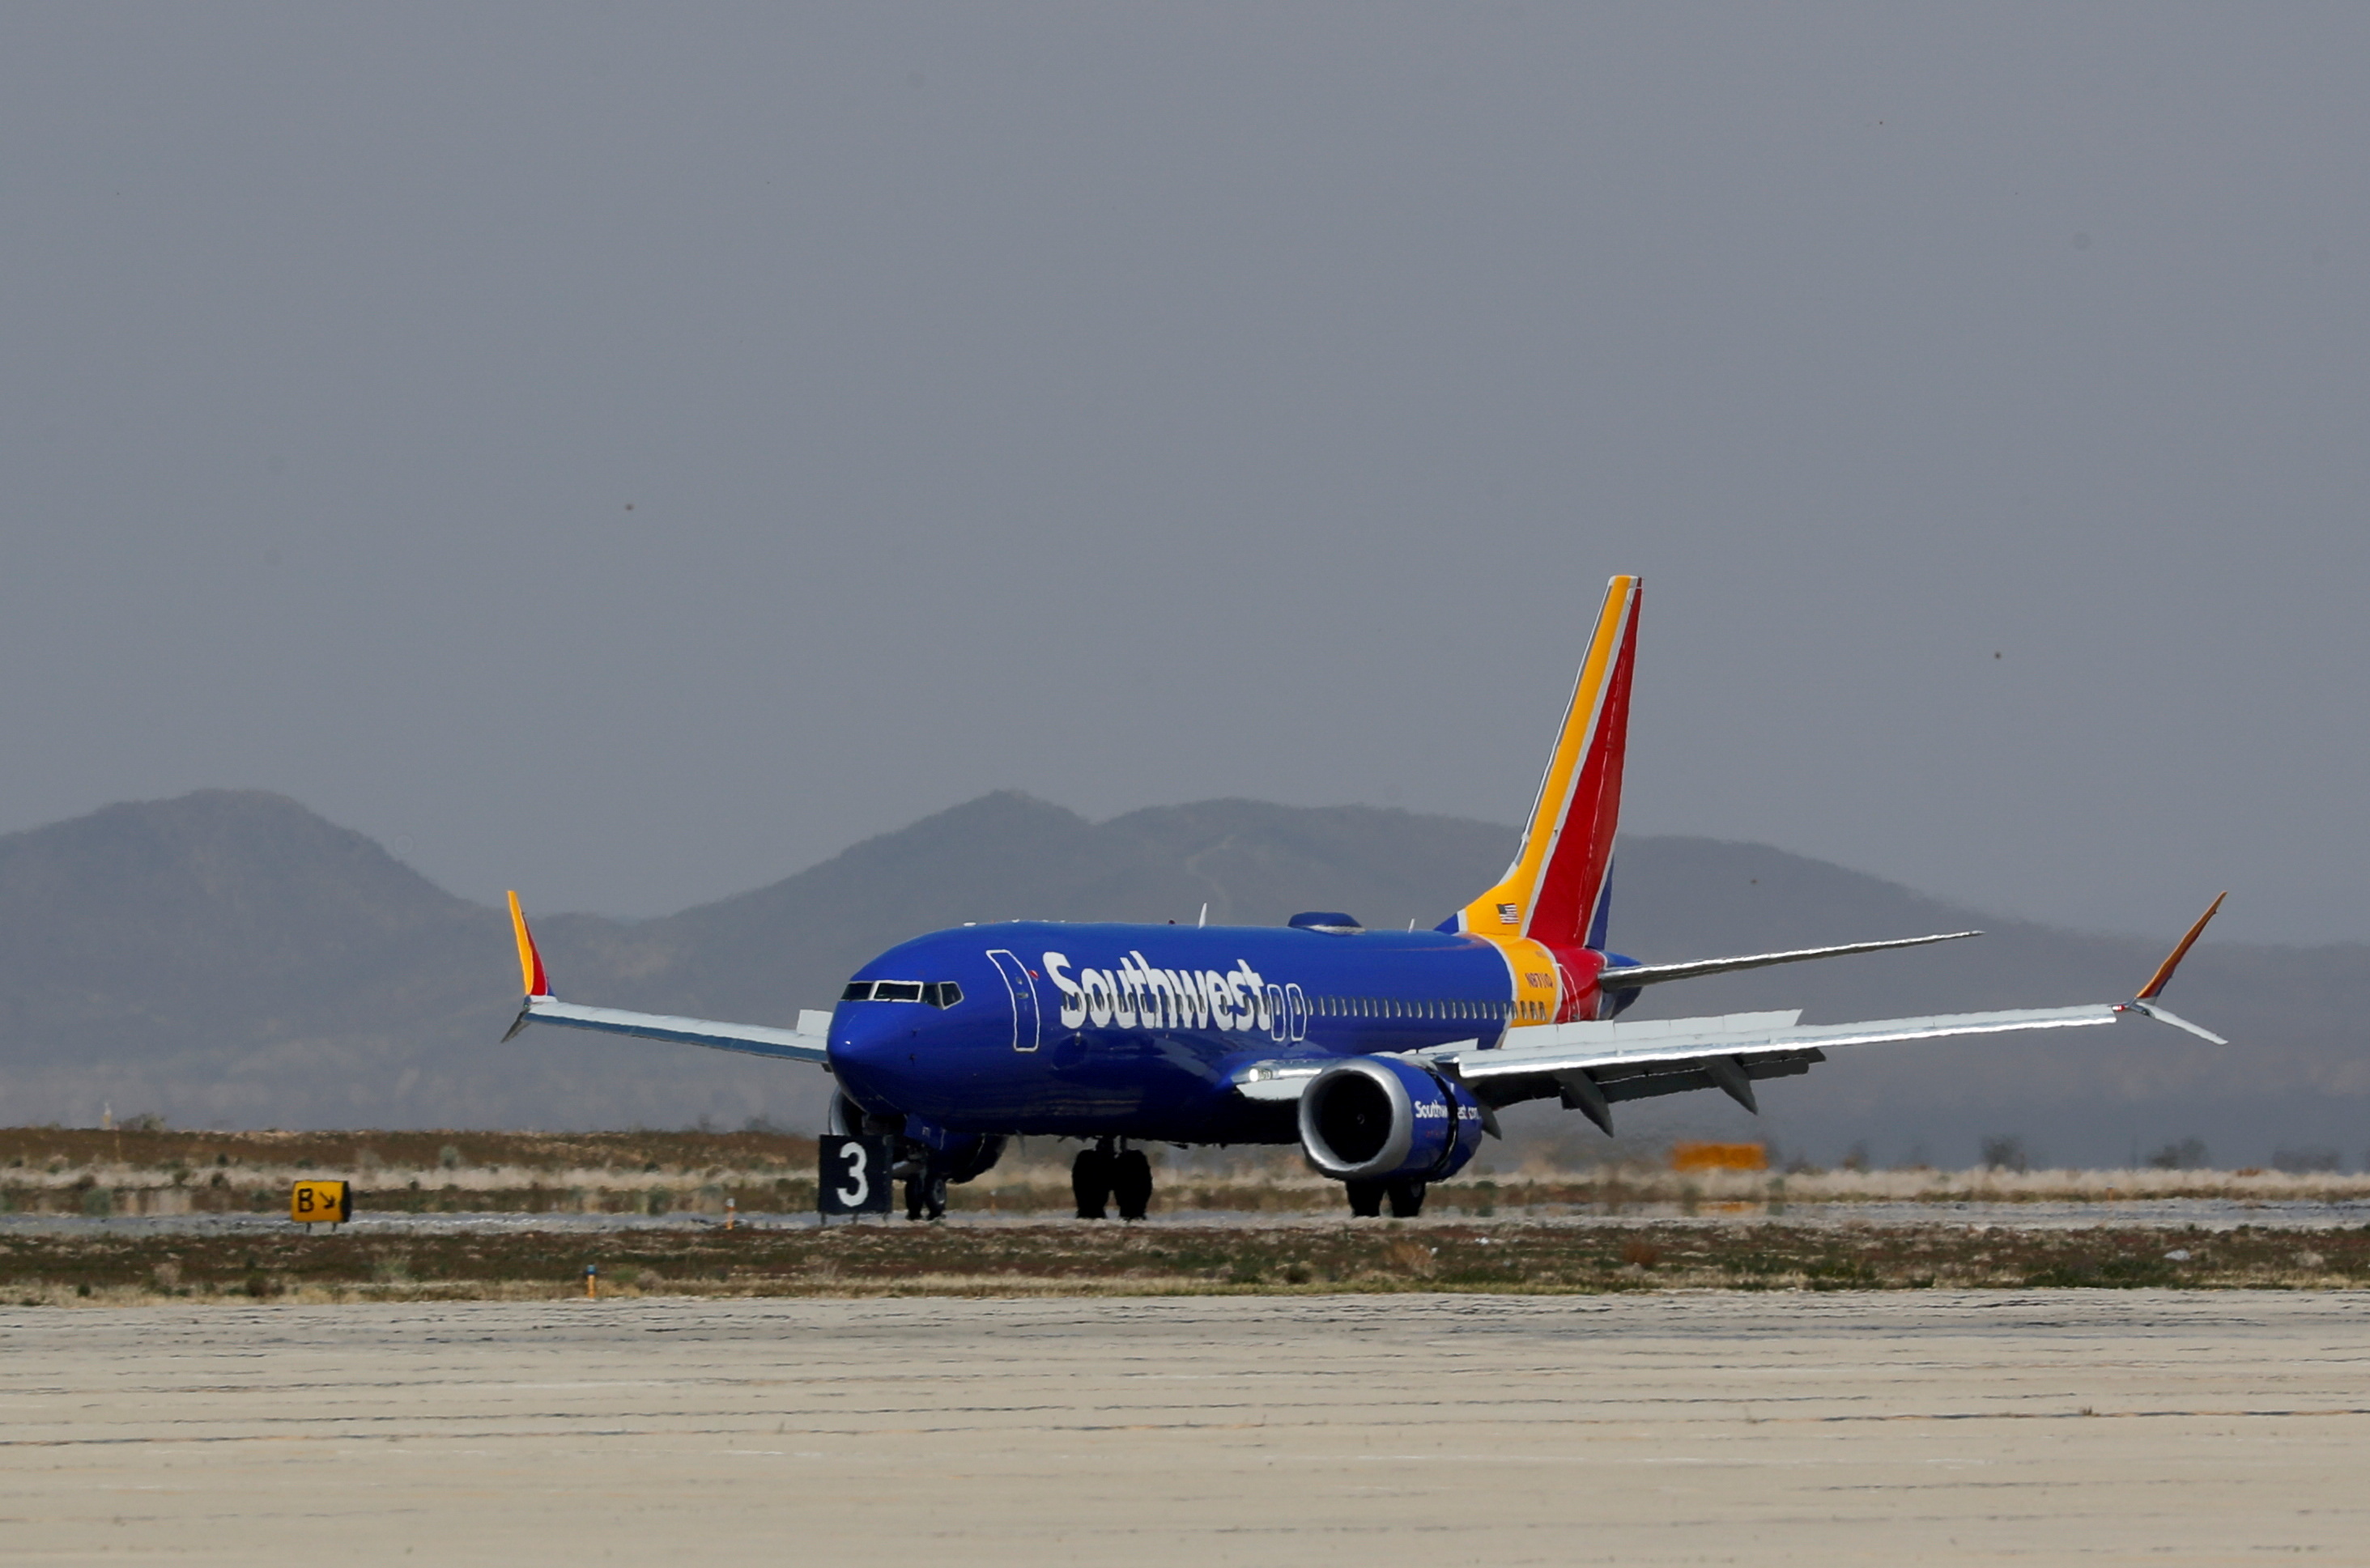 A Southwest Airlines Boeing 737 MAX 8 aircraft lands at Victorville Airport in Victorville, California